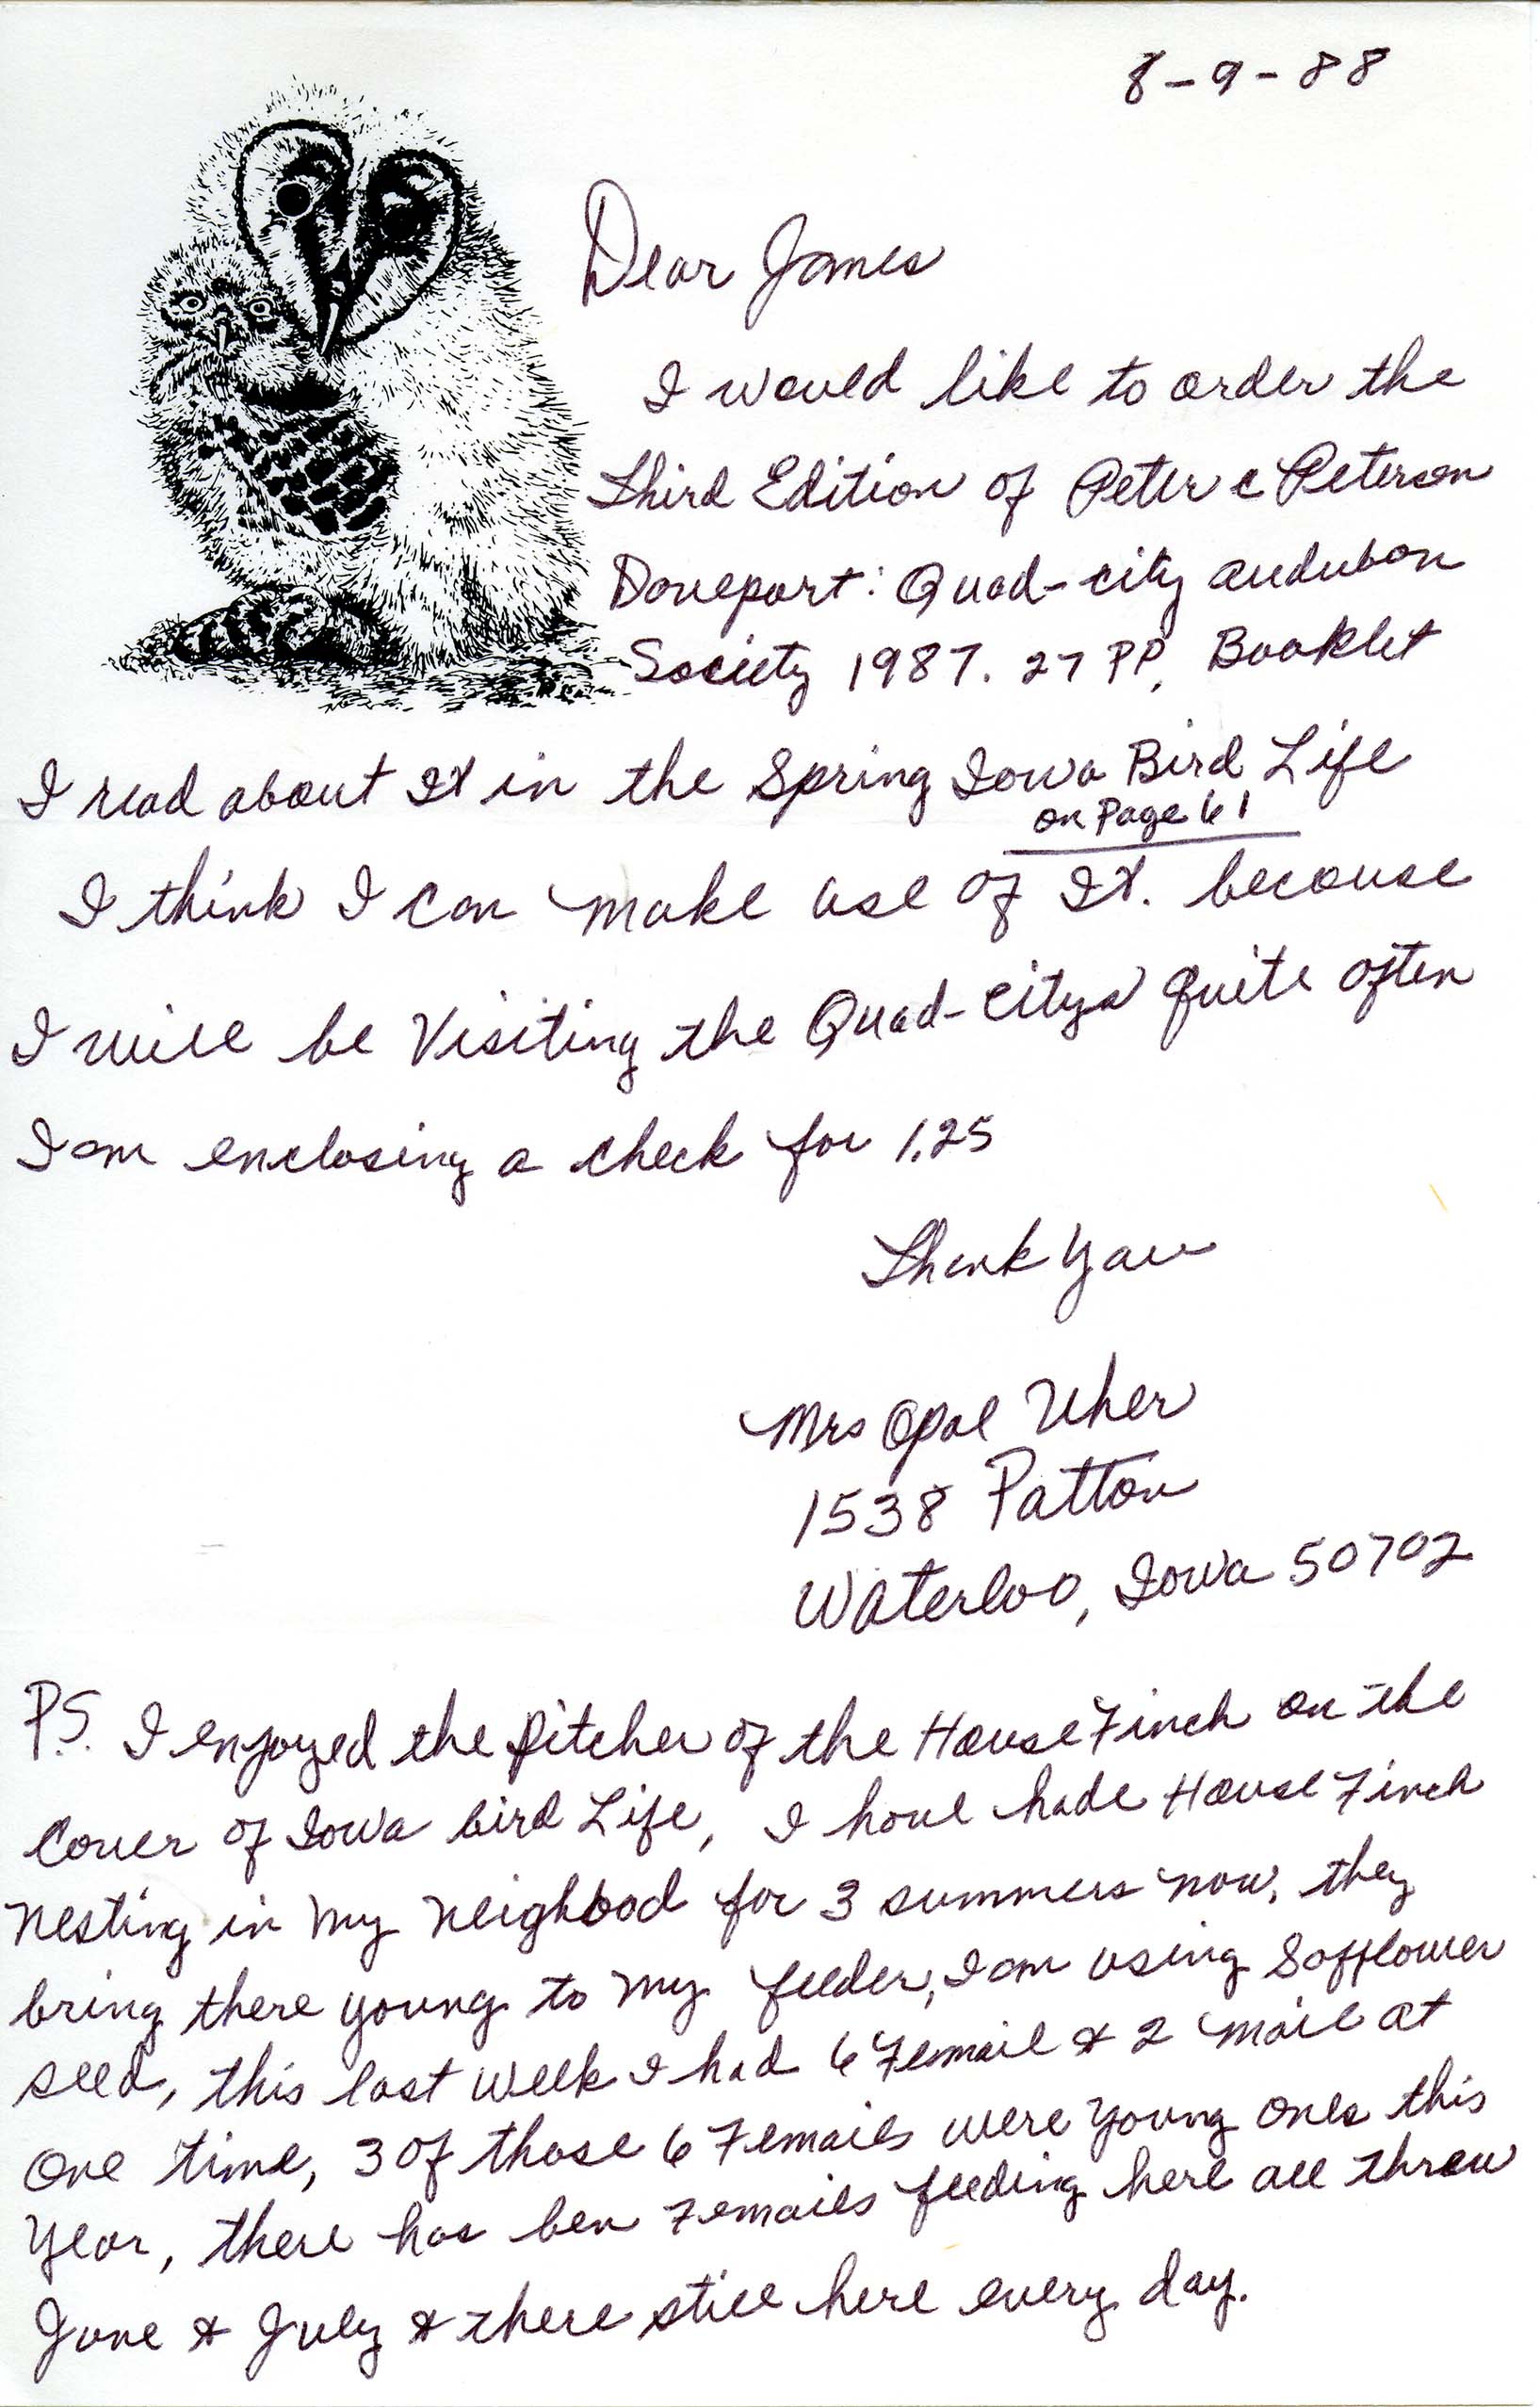 Opal Uher letter to James J. Dinsmore regarding a request to purchase a Peter C. Petersen publication, August 9, 1988